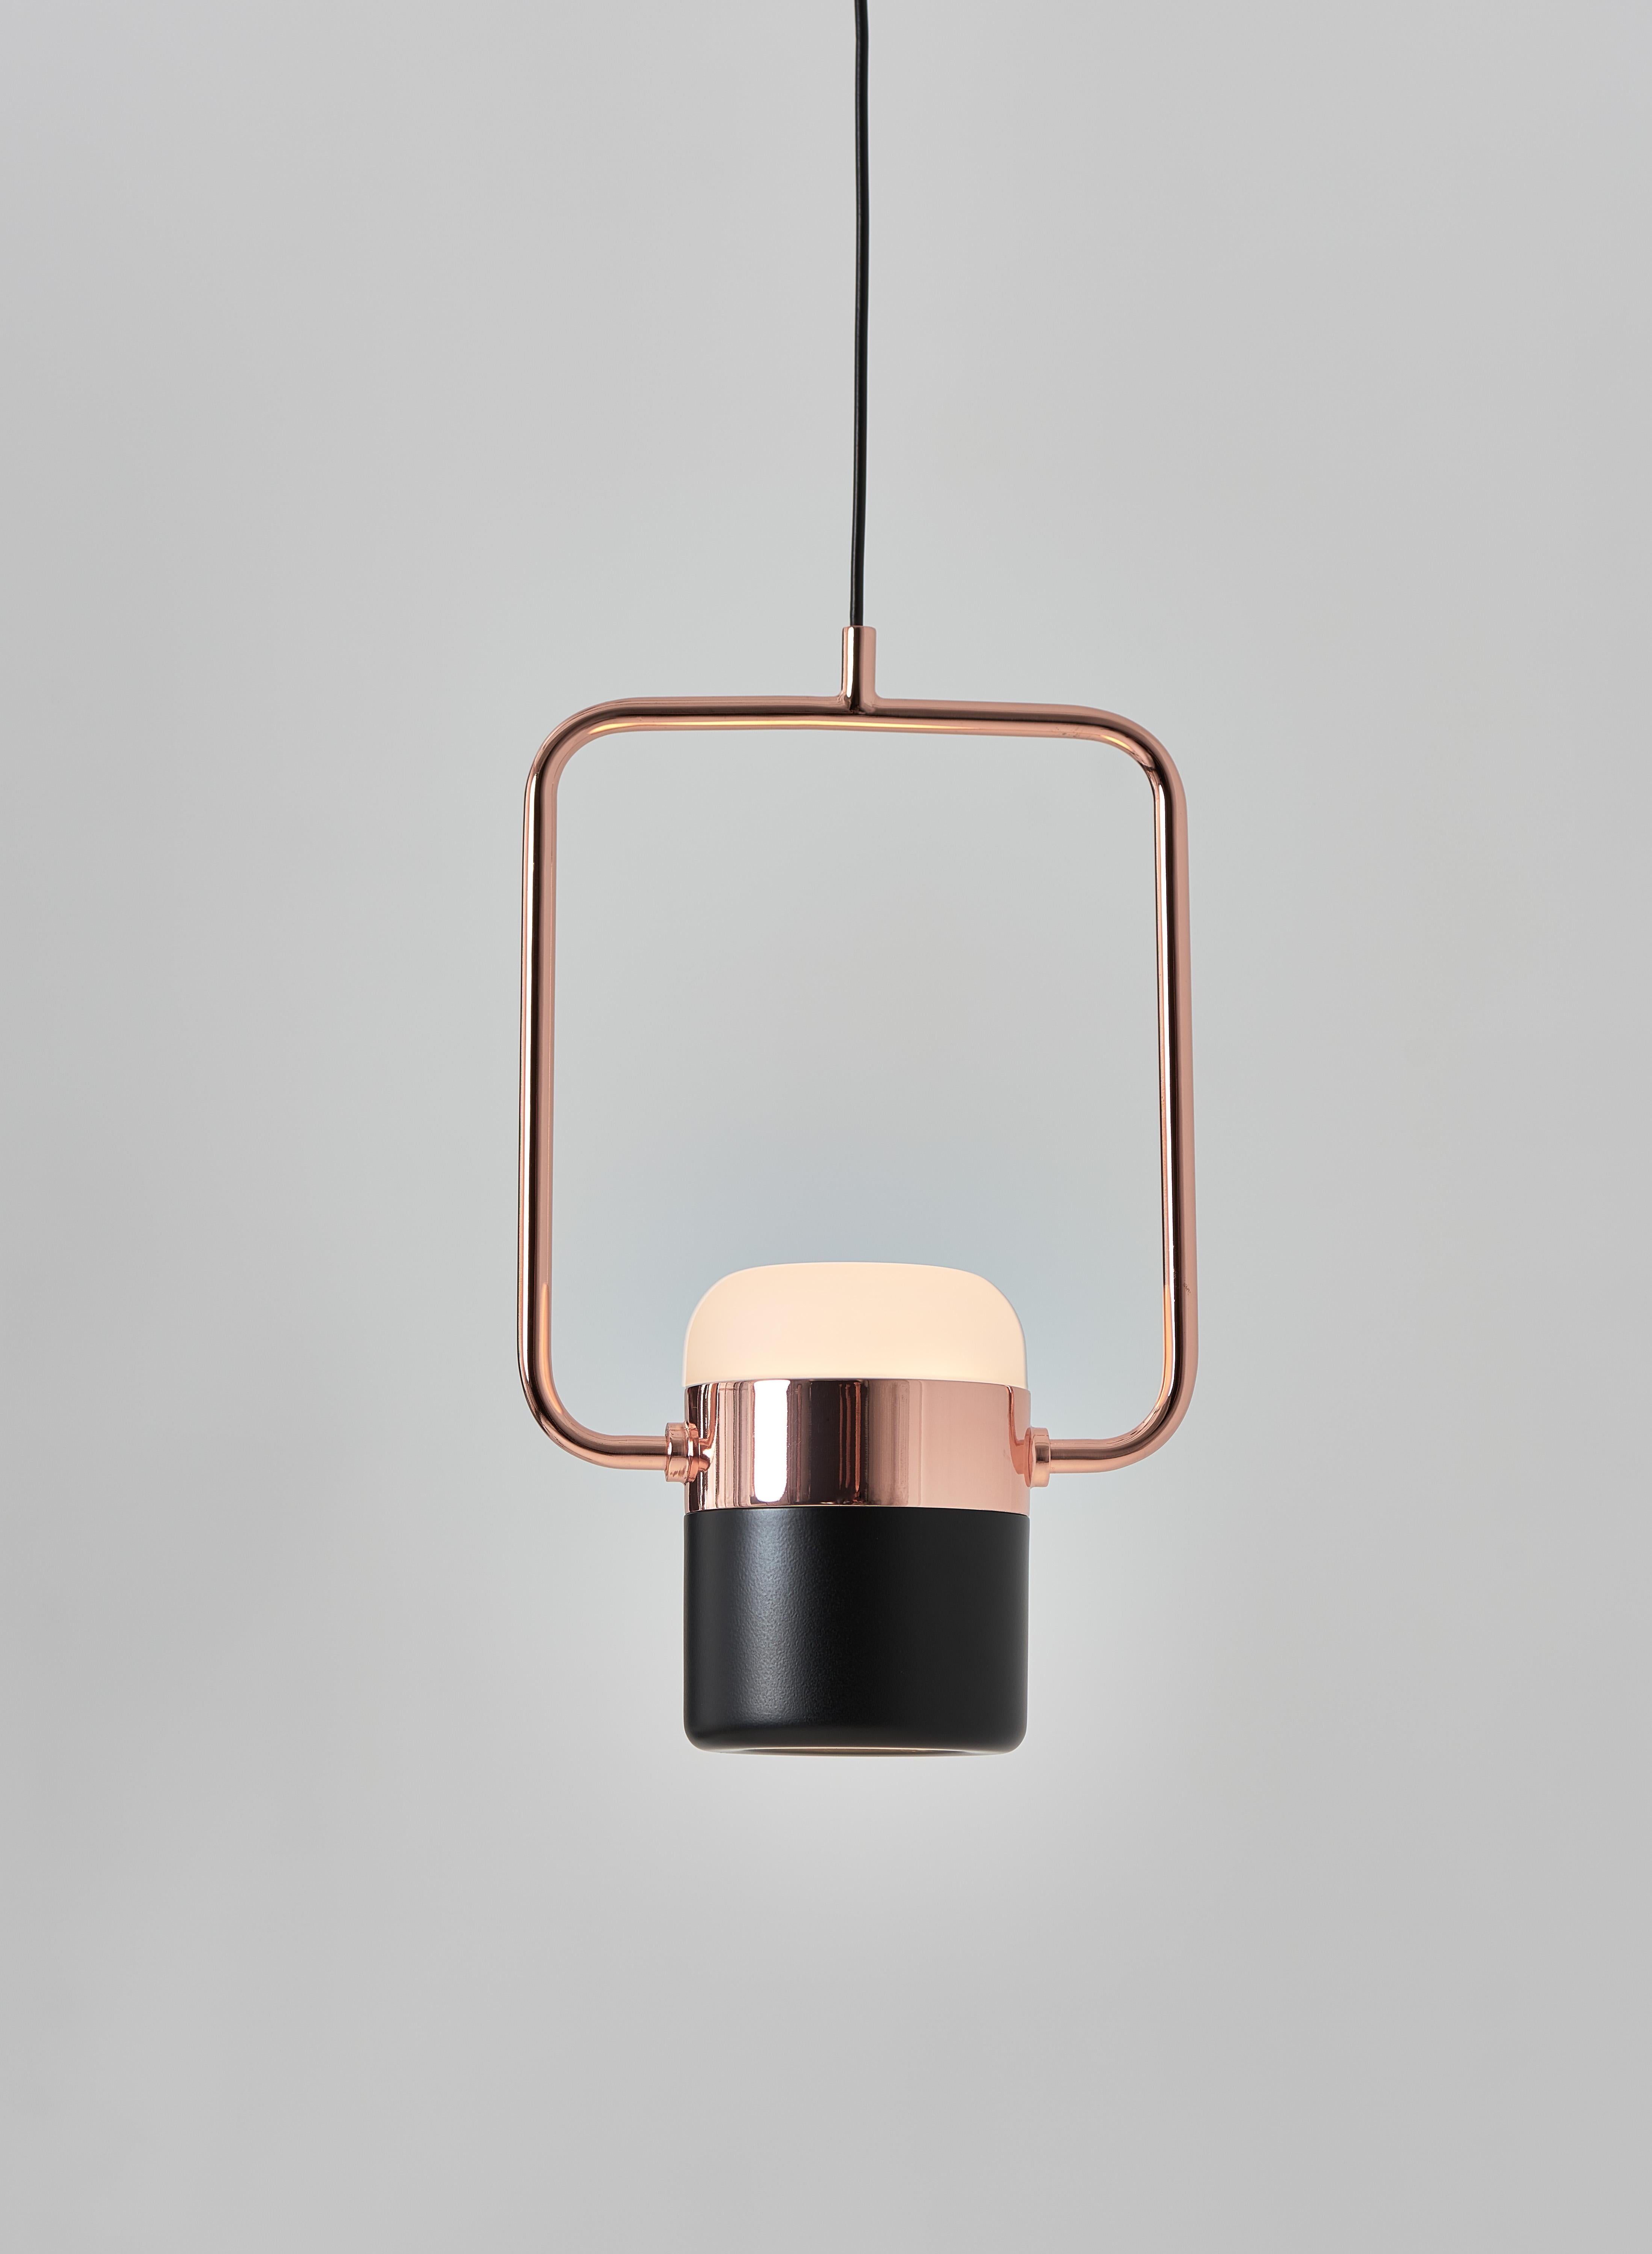 LING Pendant V is a harmonious mingle of minimalism and nostalgia design which is inspired by patterned metal-fence used to be built around balconies and windows in early Taiwan. The copper/ brass glow elegantly connects glass and metal shade.